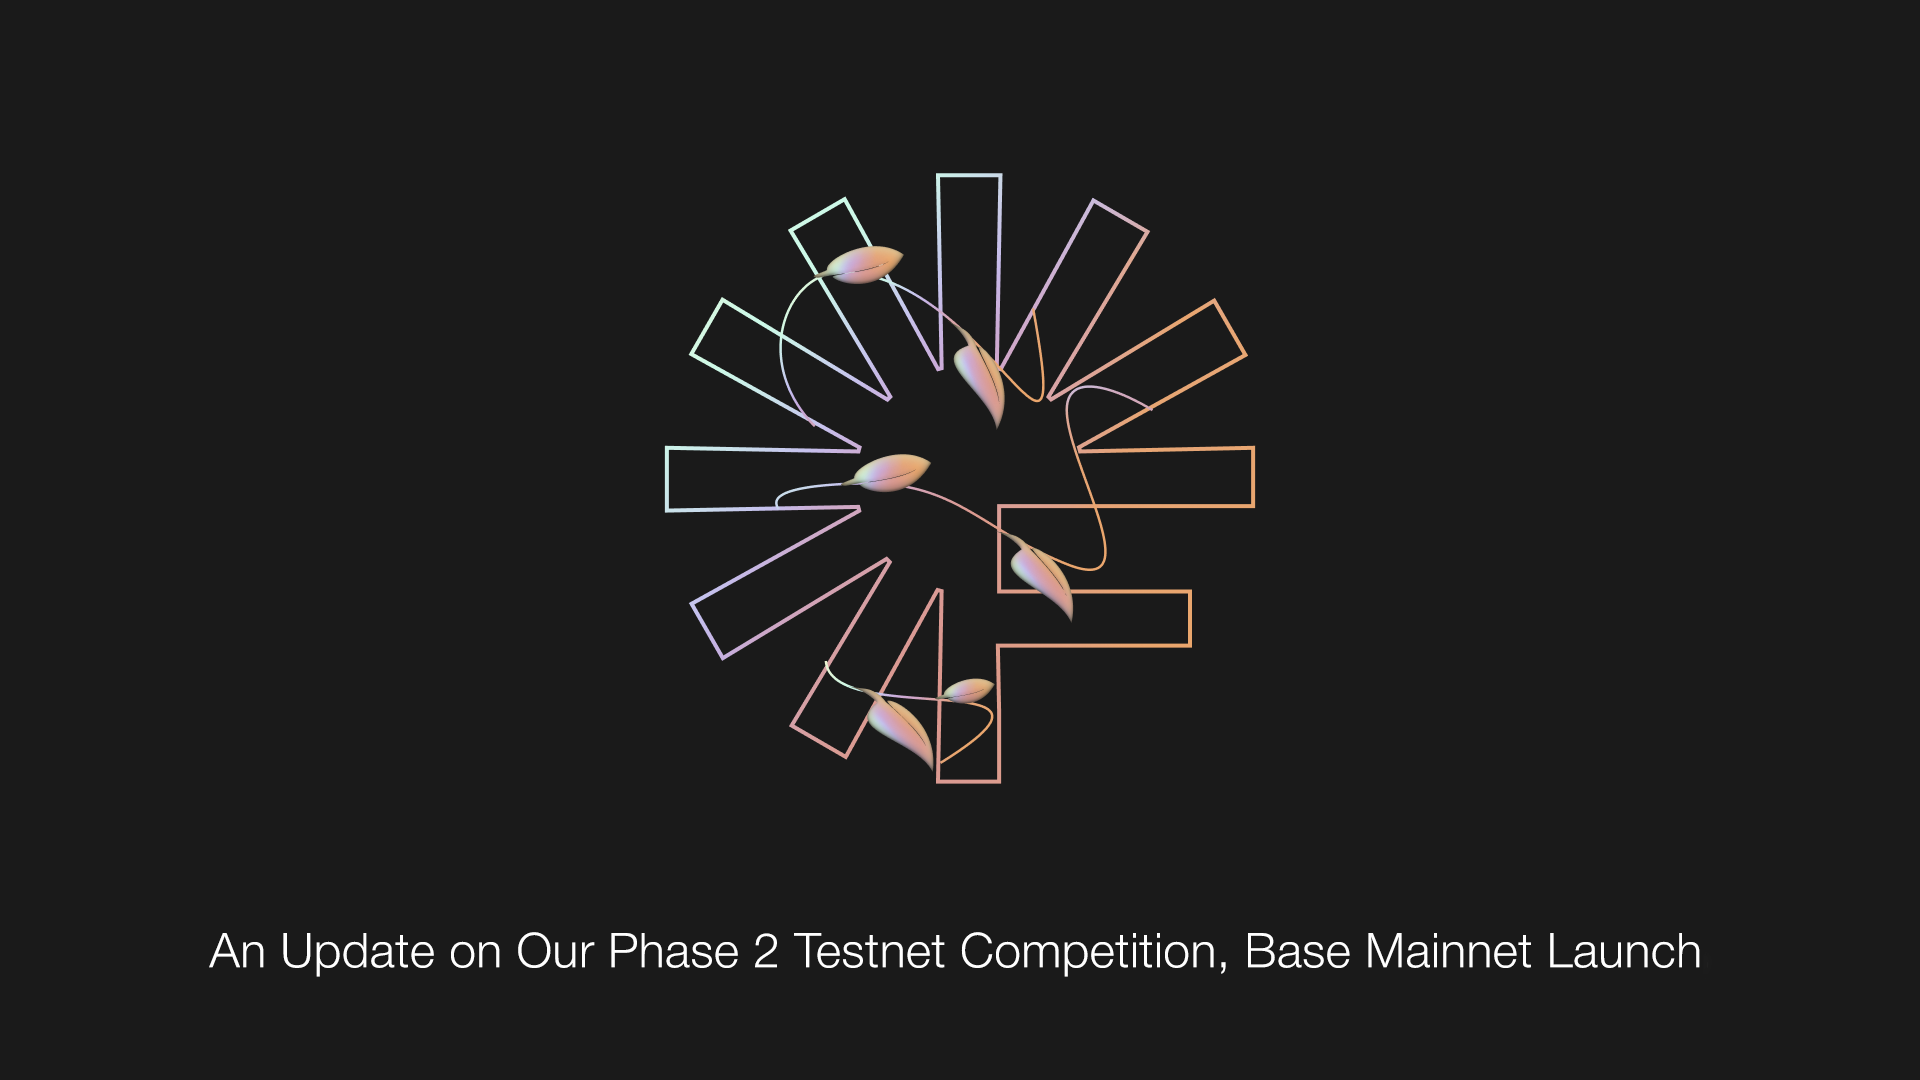 An Update on Our Phase 2 Testnet Competition, Base Mainnet Launch